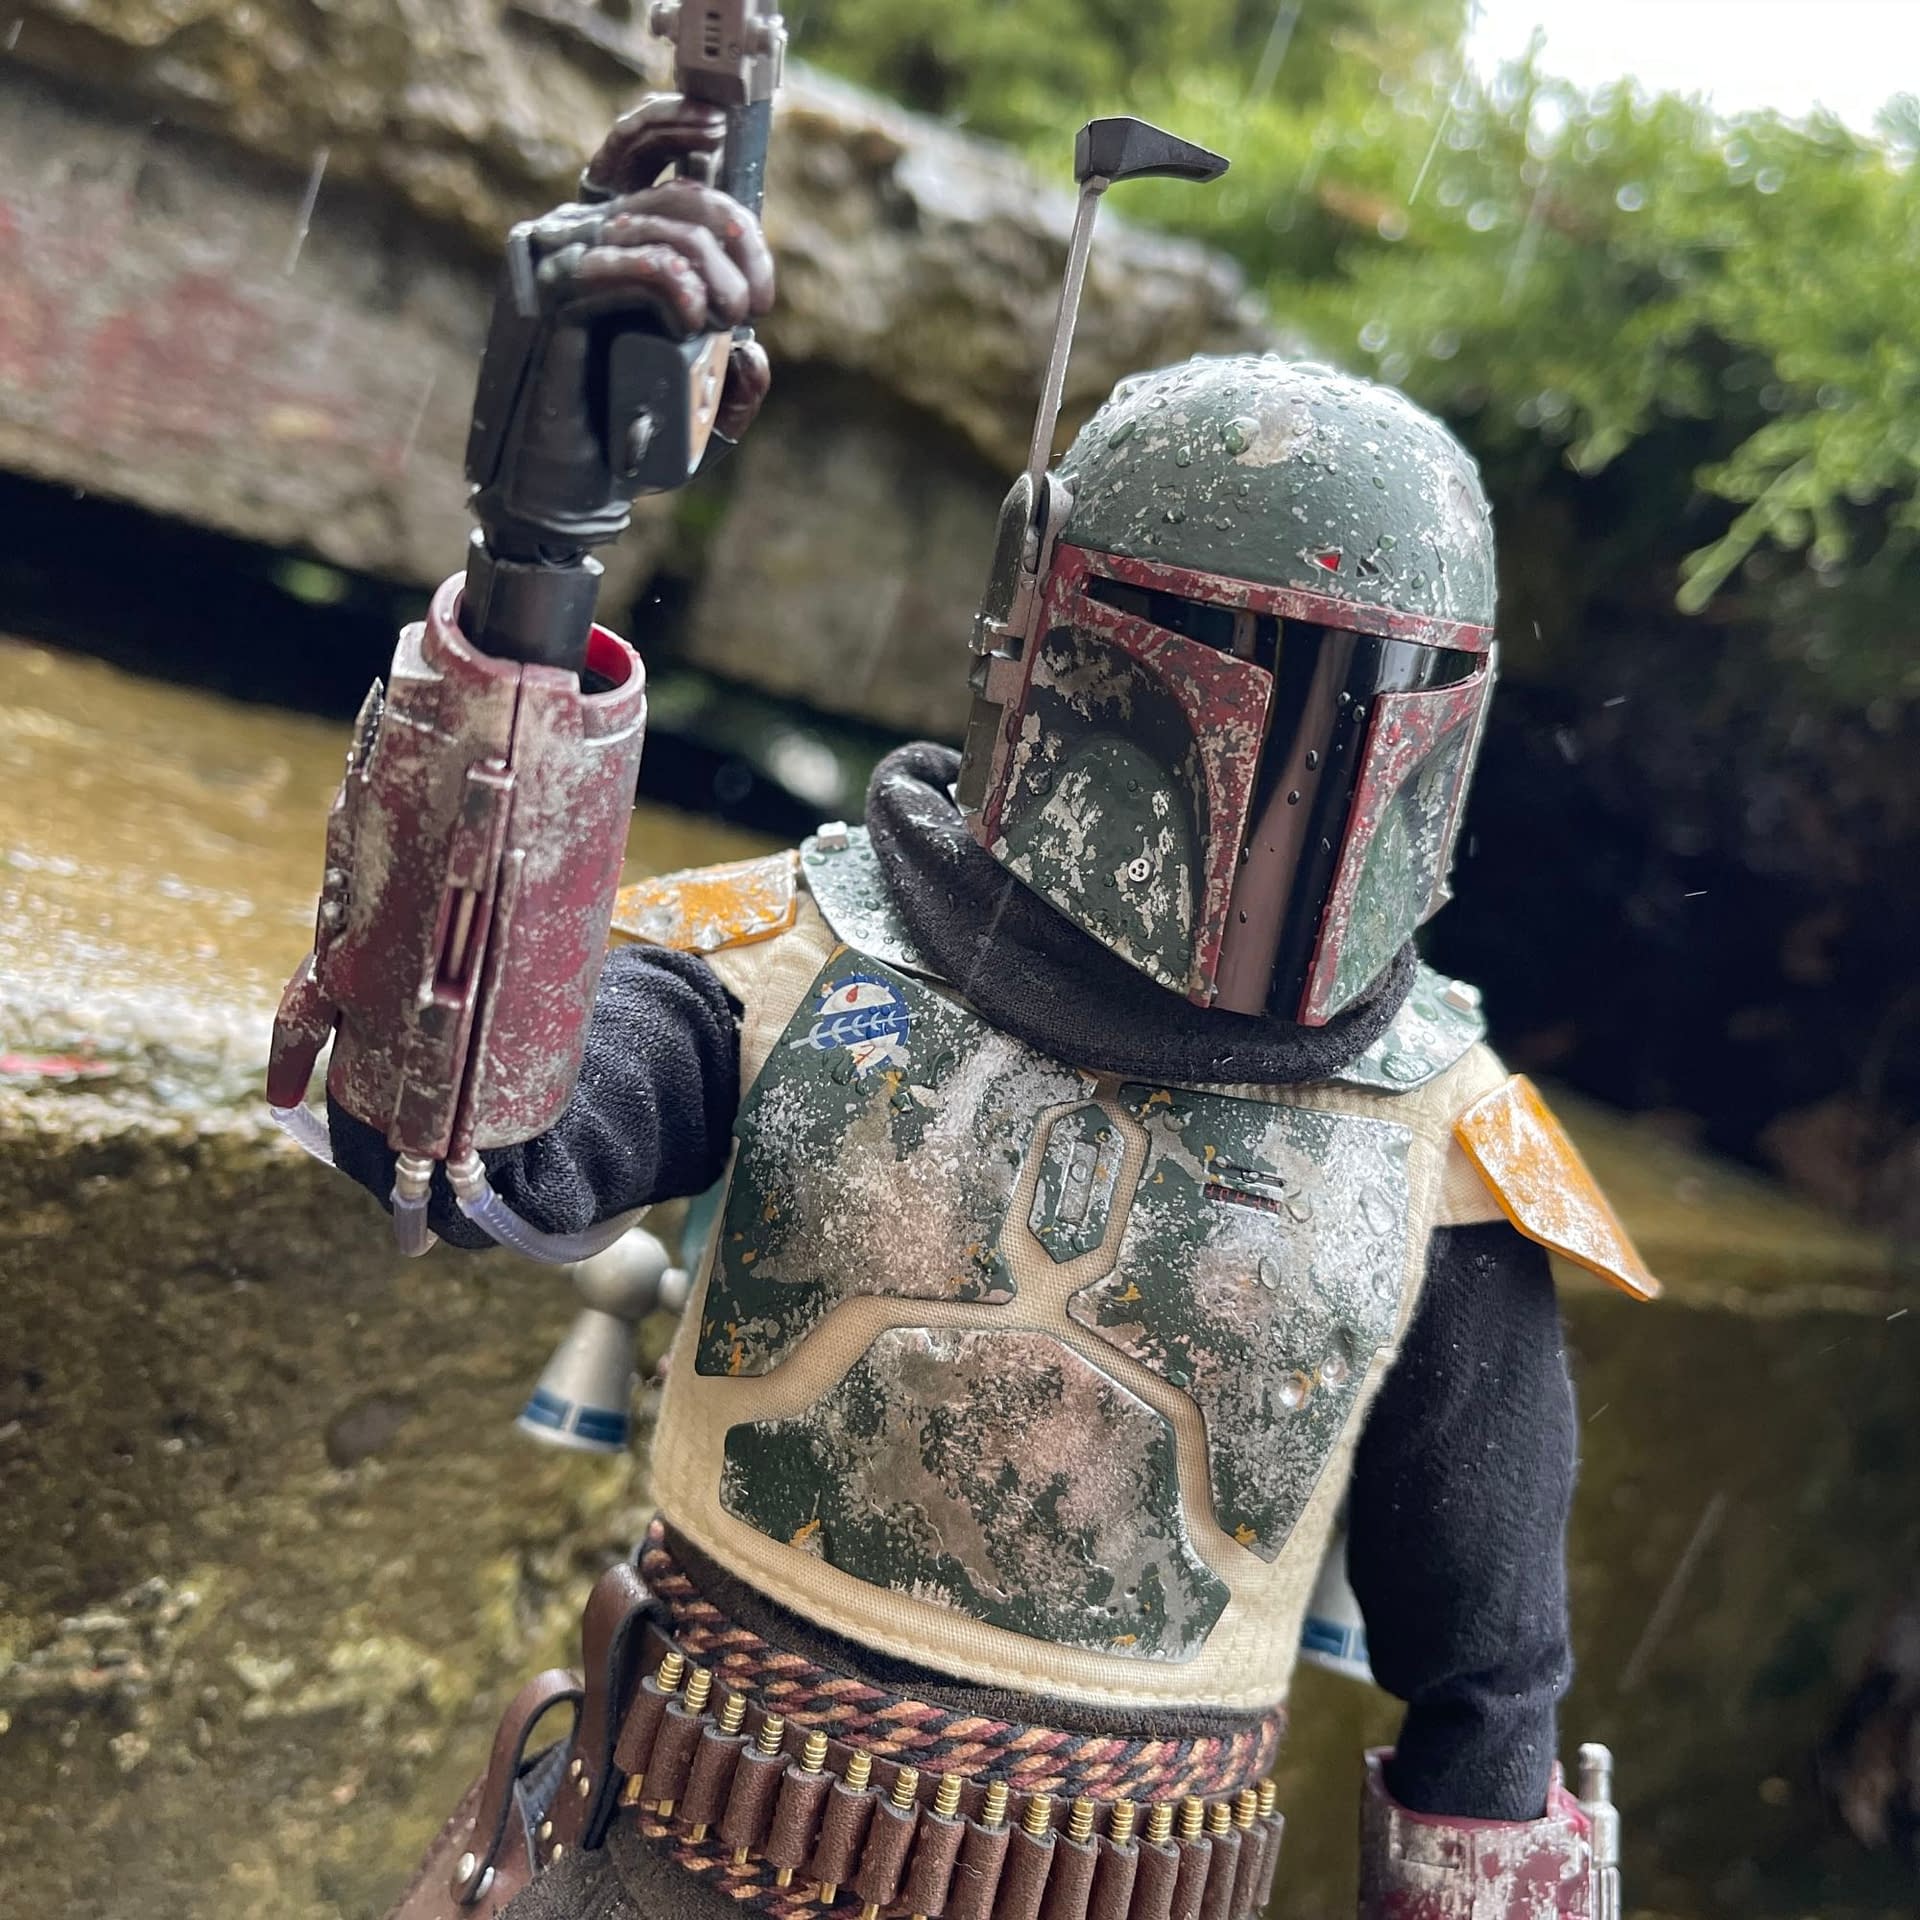 Star Wars Hot Toys Deluxe Boba Fett Set - Just A Simple Man 